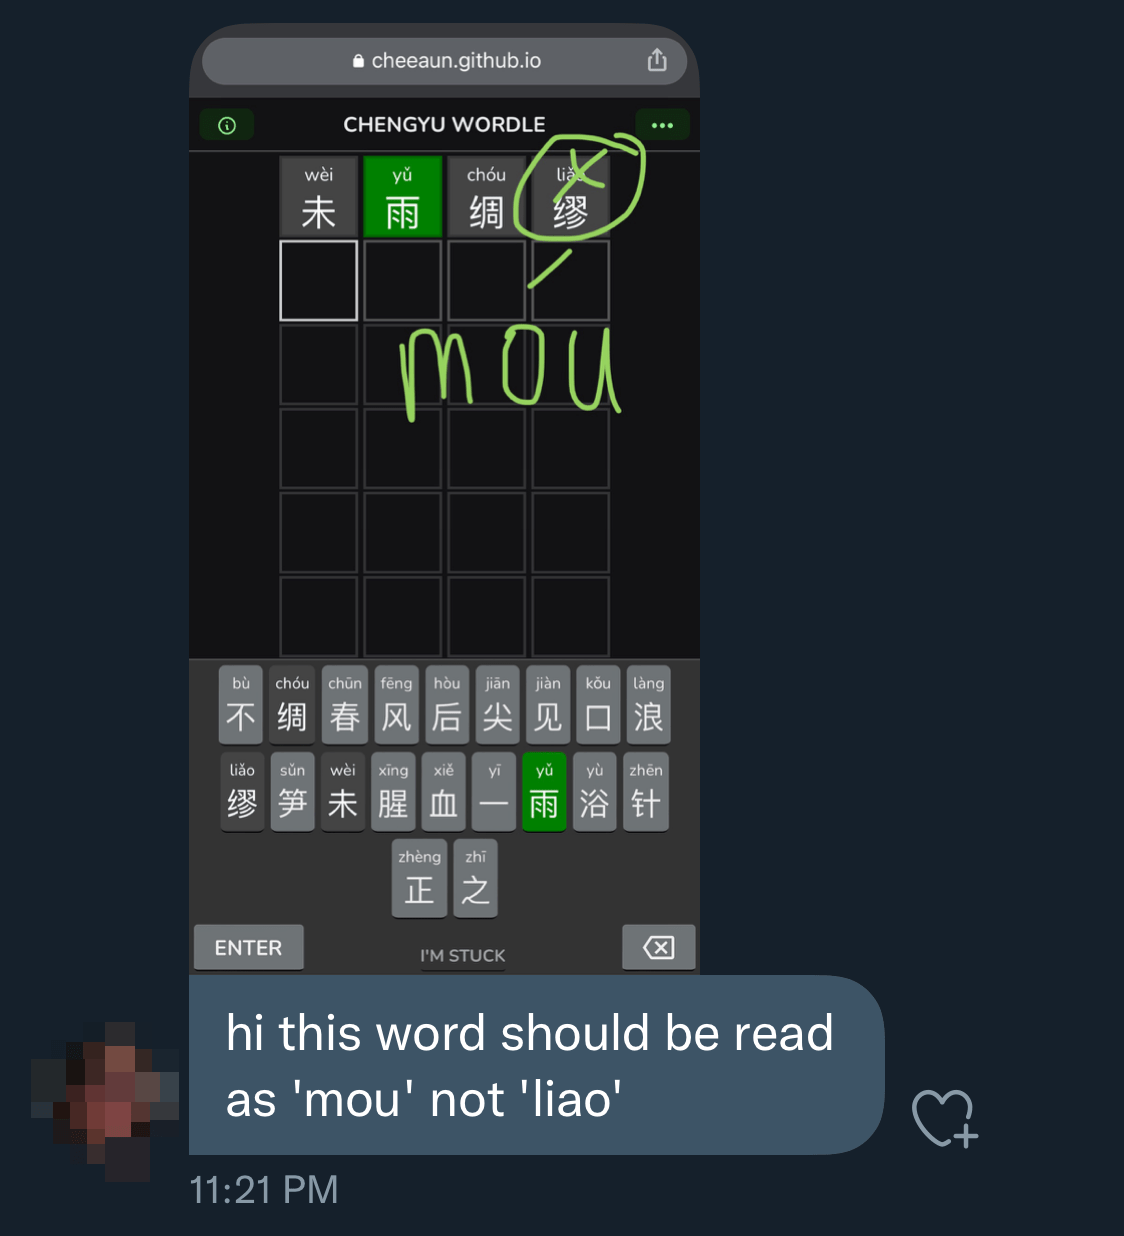 Player feedback on Twitter Direct Message about a wrong pinyin. The message includes a screenshot and a message “hi this word should be read as ‘mou’ not ‘liao’”